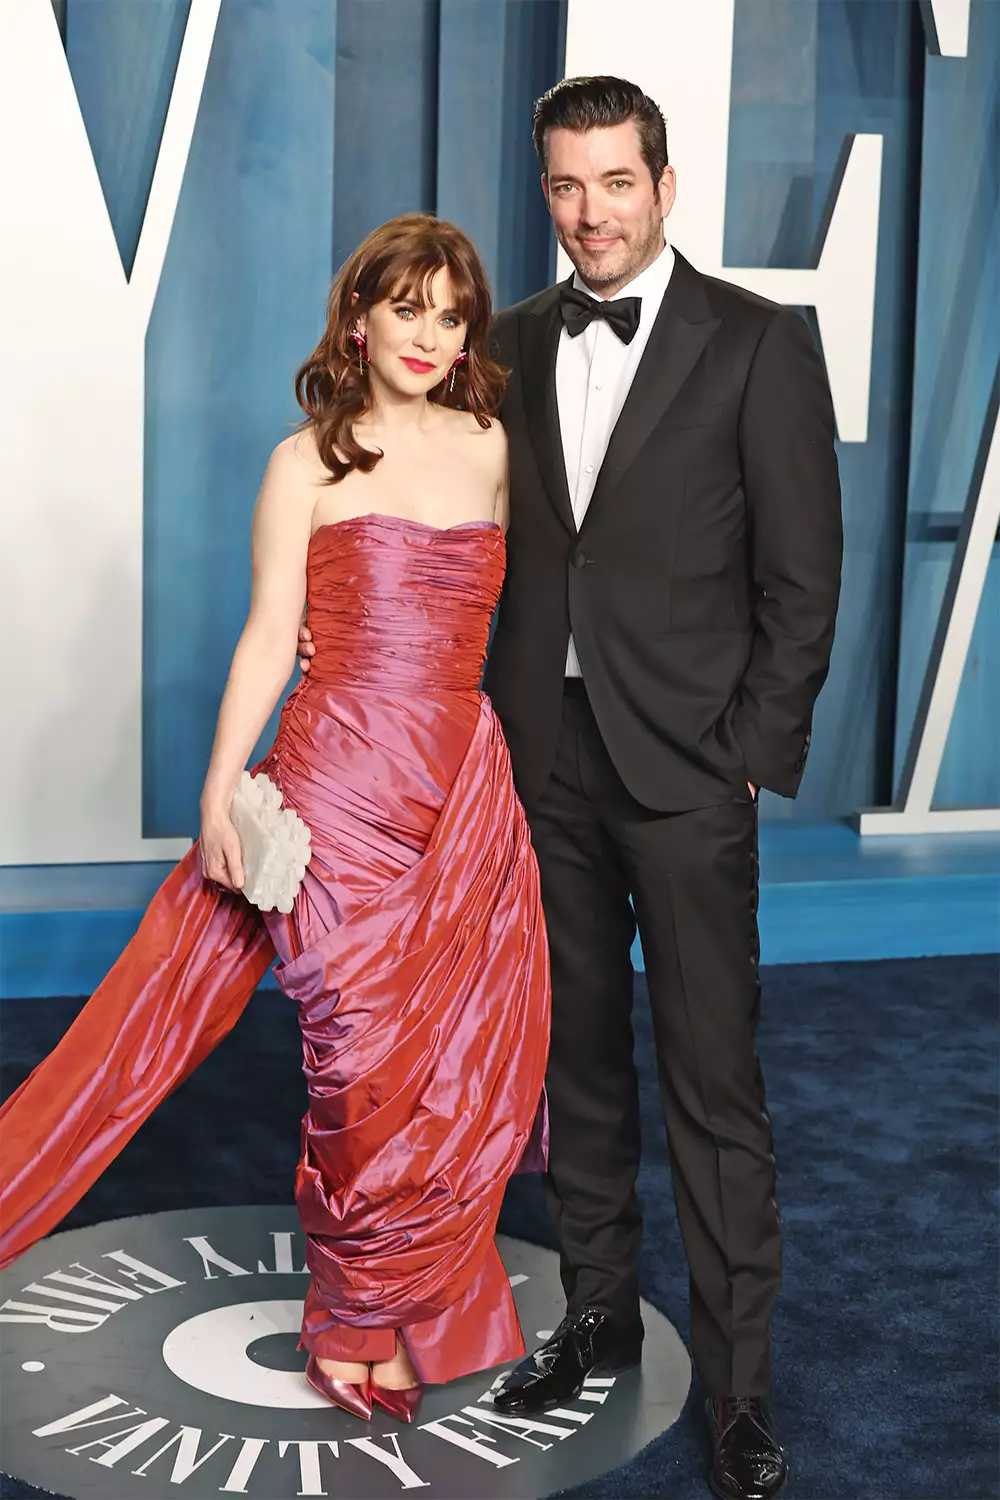 Zooey Deschanel Claims Jonathan Scott Ghosted Her Early in Their Relationship